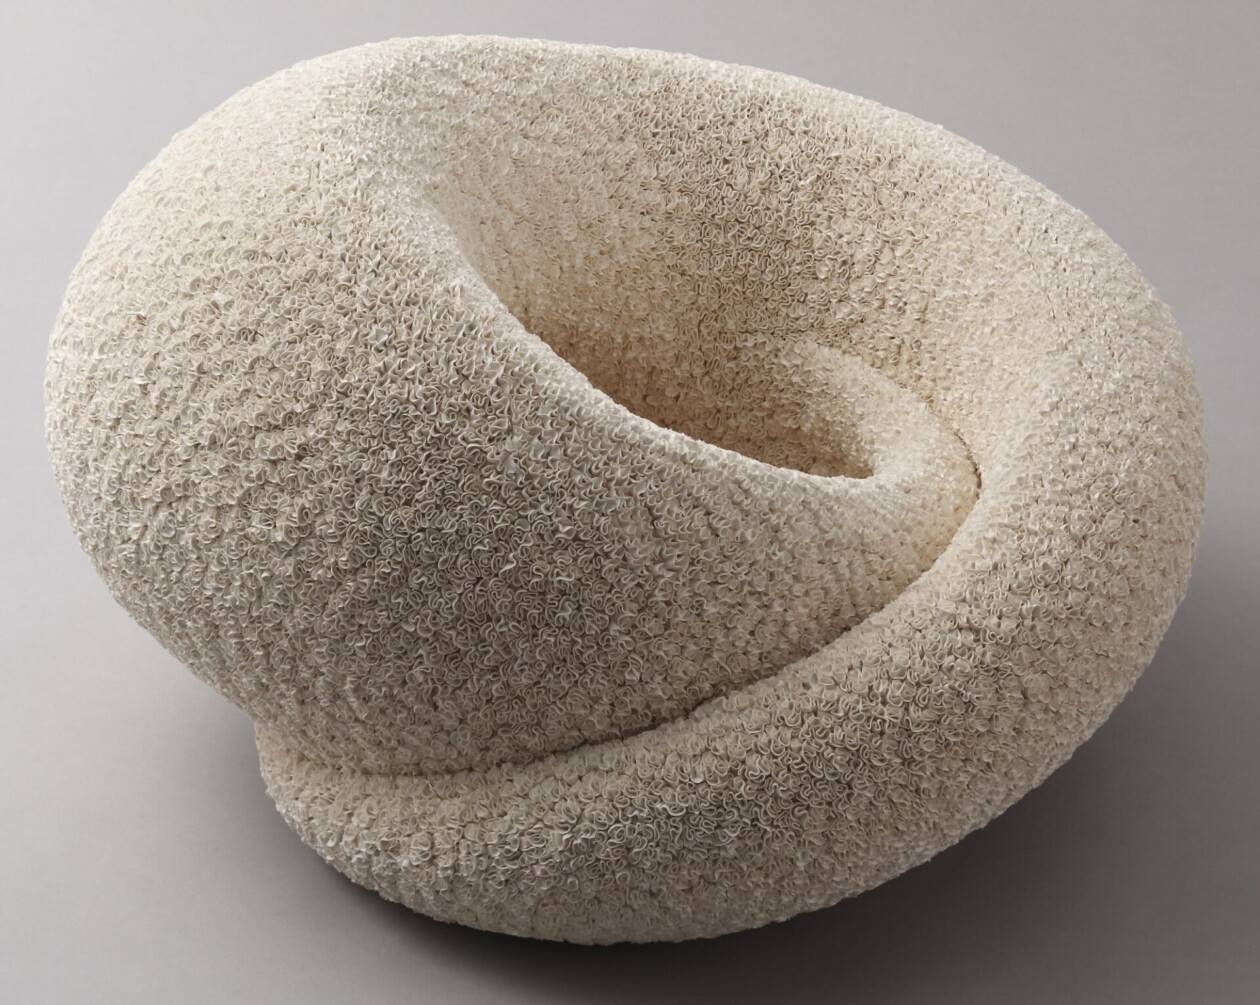 Intricately Coiled Porcelain Sculptures By Hattori Makiko (4)